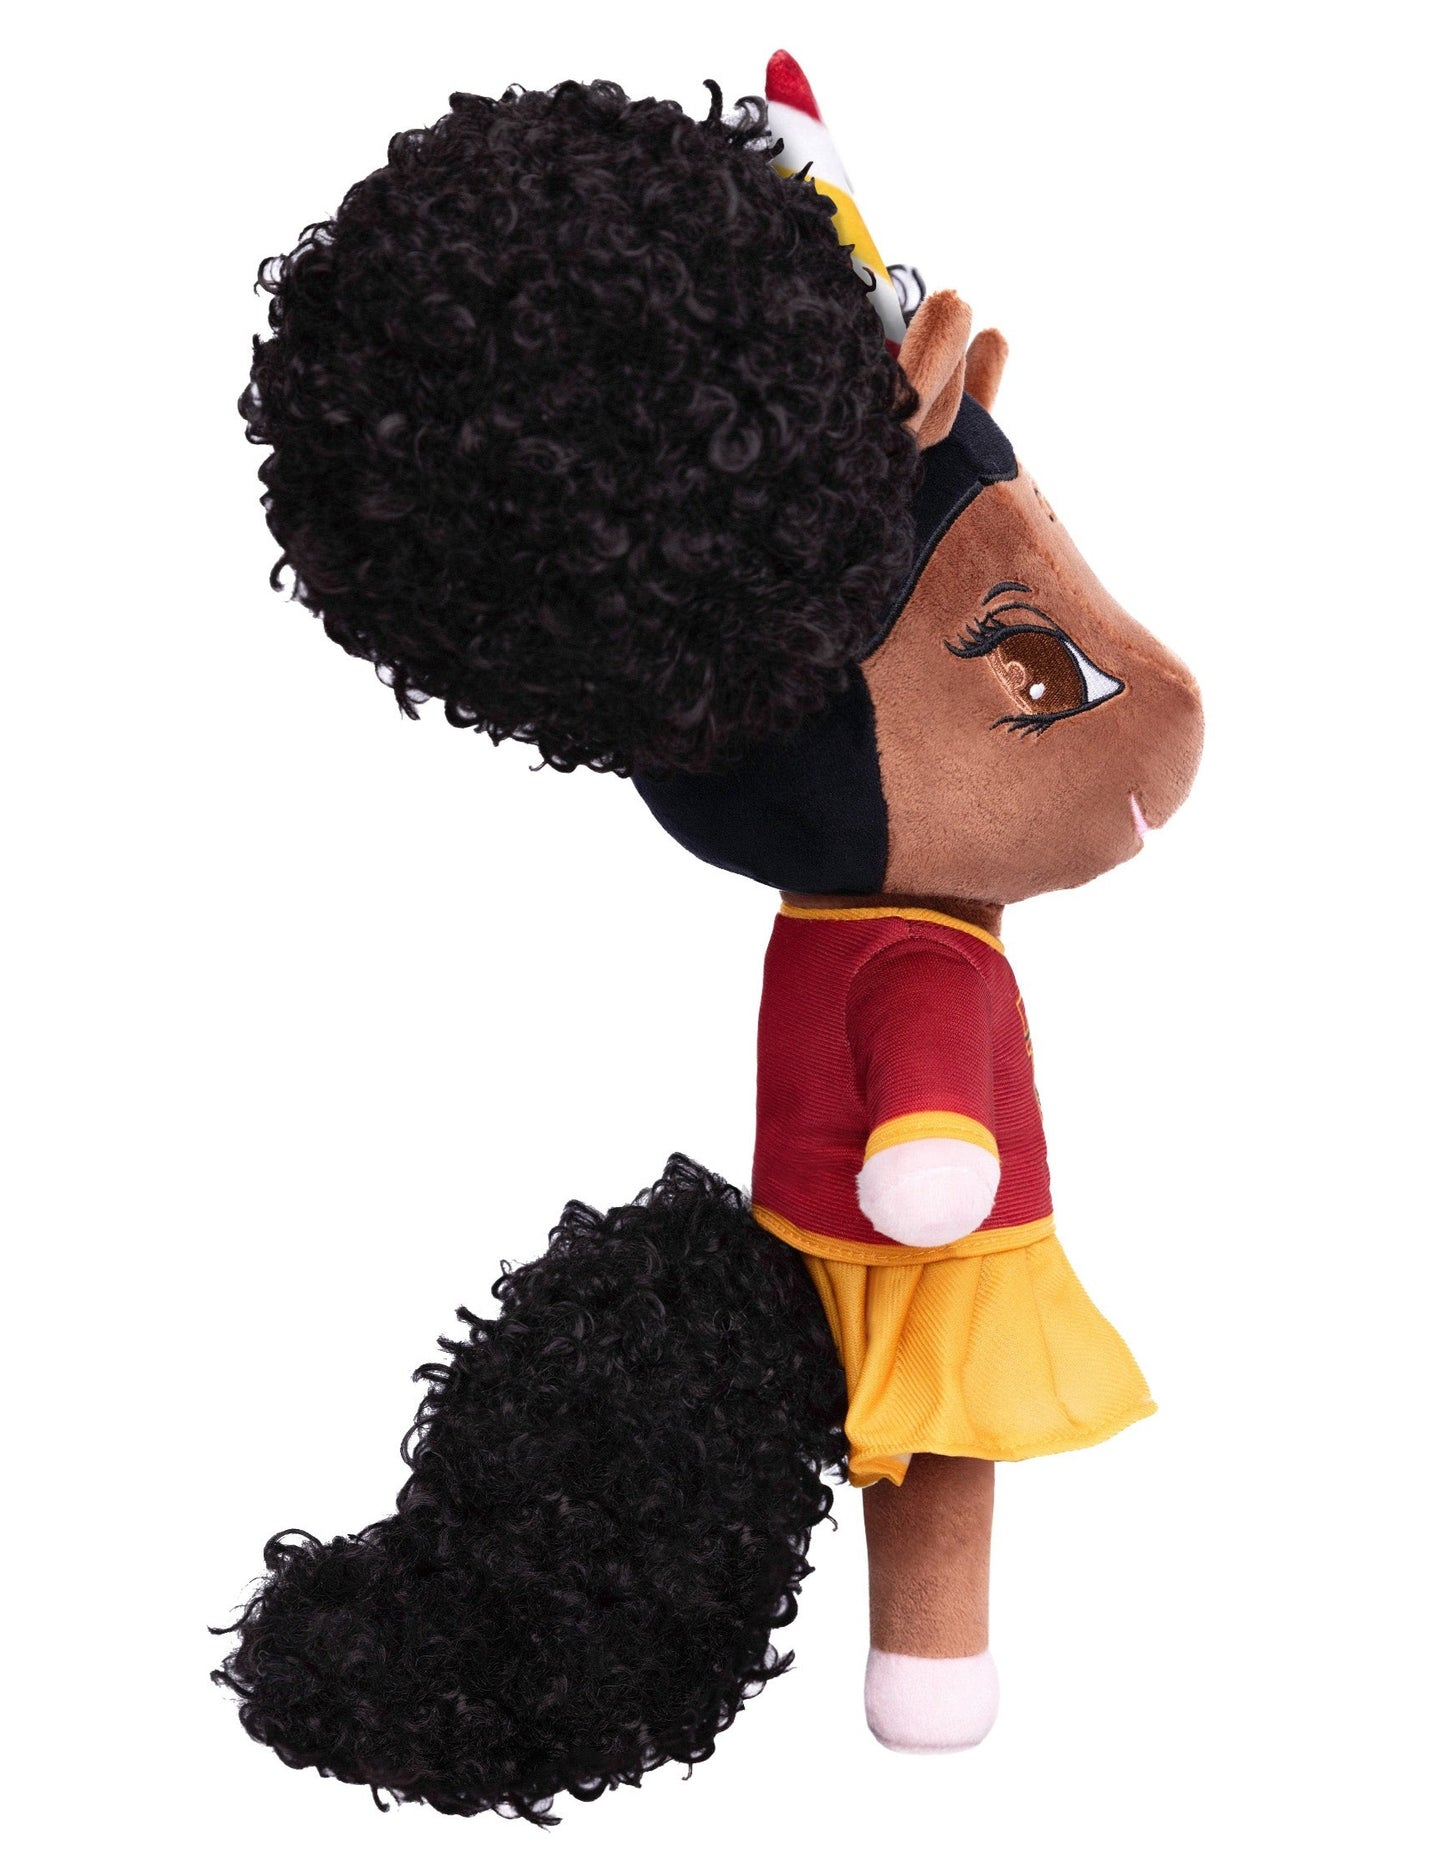 Tuskegee University Unicorn Doll with Afro Puffs - 14 inch